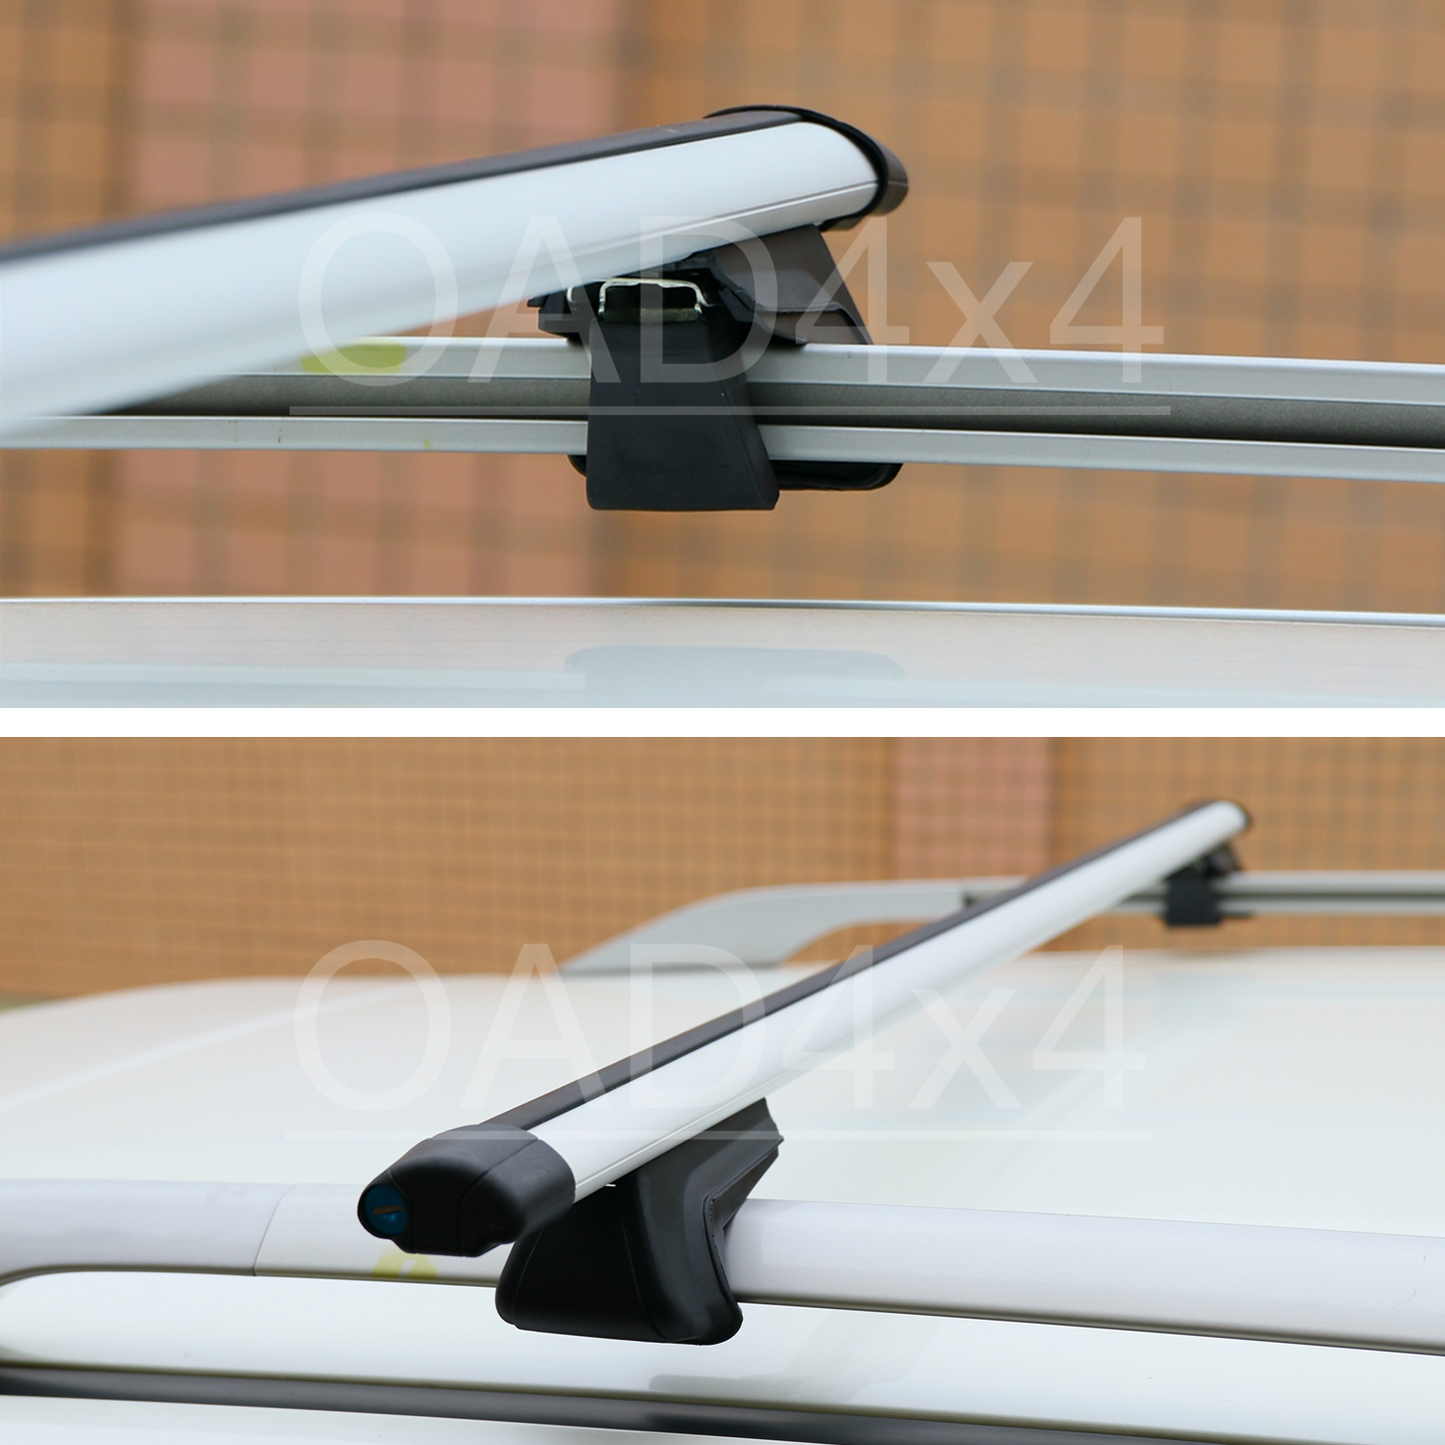 OAD 1 Pair Aluminum Silver Cross Bar Roof Racks Baggage holder for Toyota Kluger 07-13 with raised roof rail